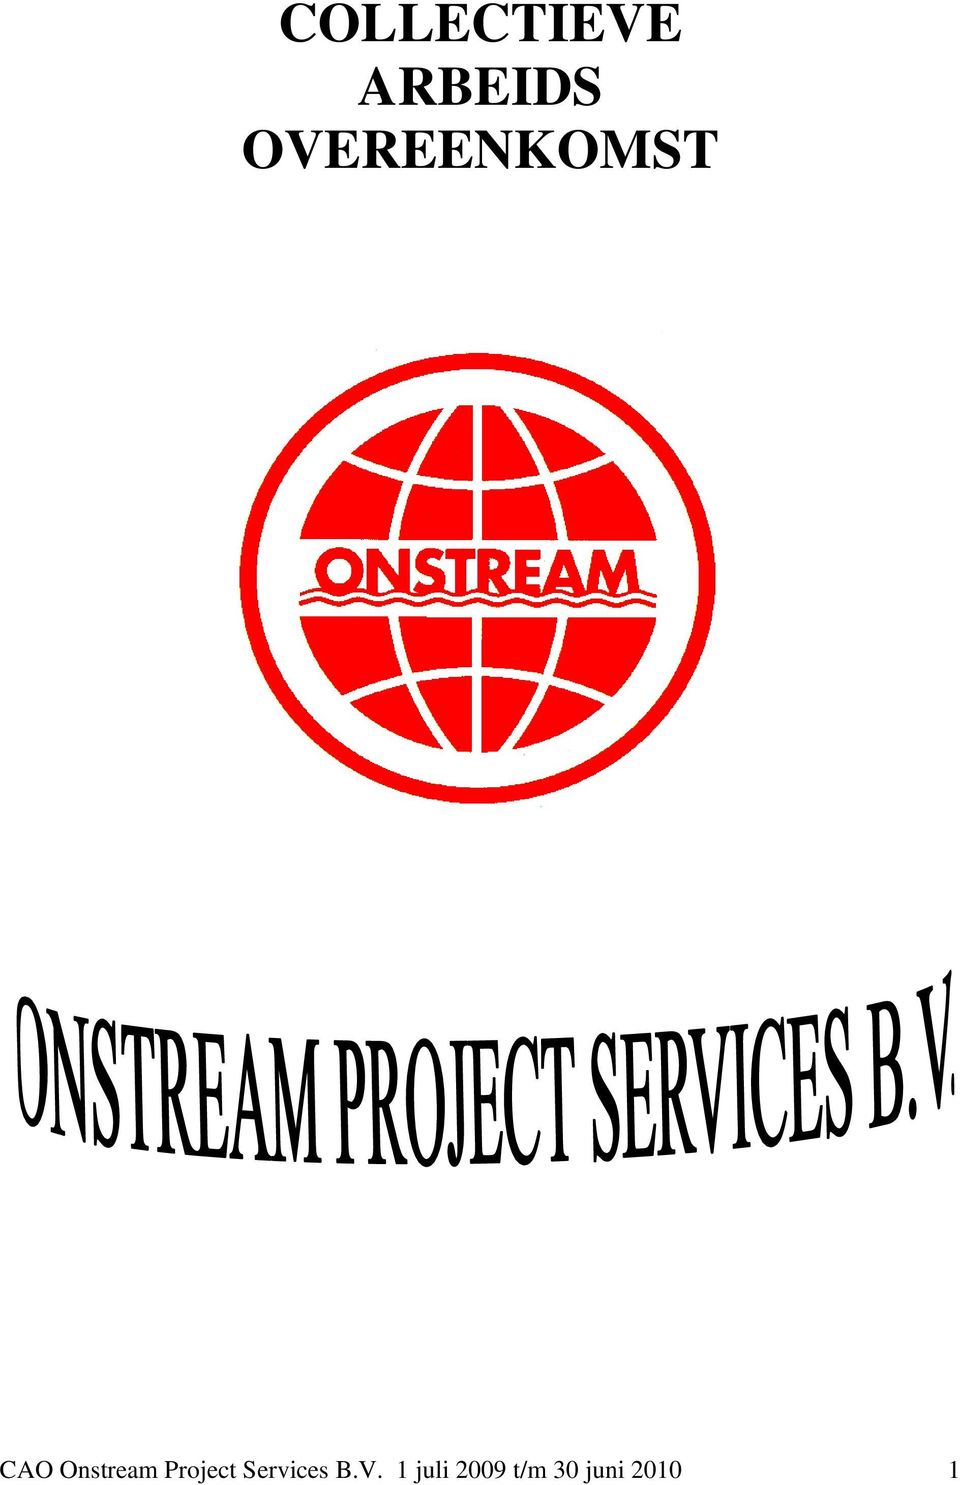 Onstream Project